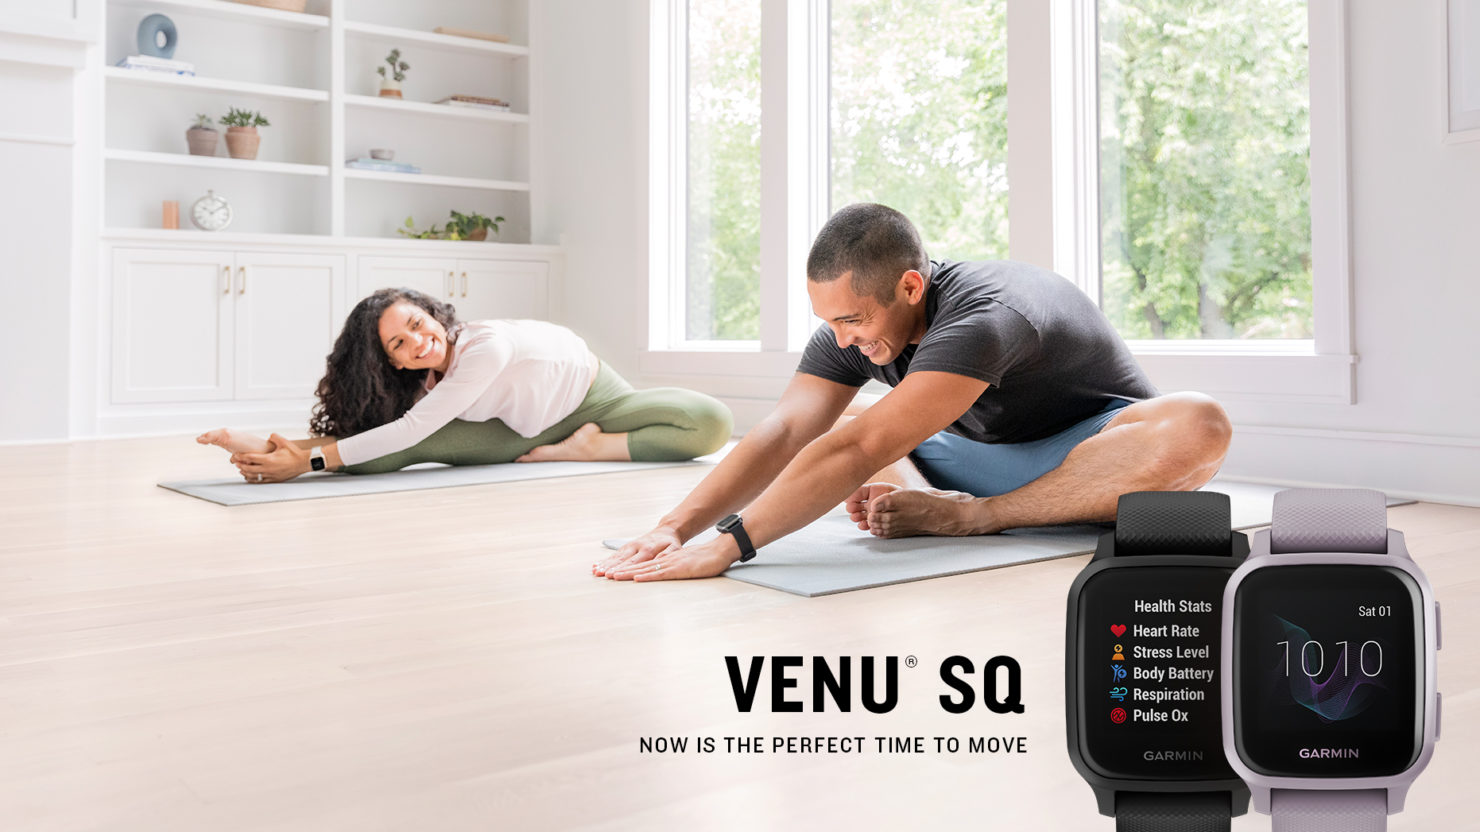 Garmin Venu Sq Music, GPS Smartwatch with Bright Touchscreen Display,  Features Music and Up To 6 Days of Battery Life, White and Slate